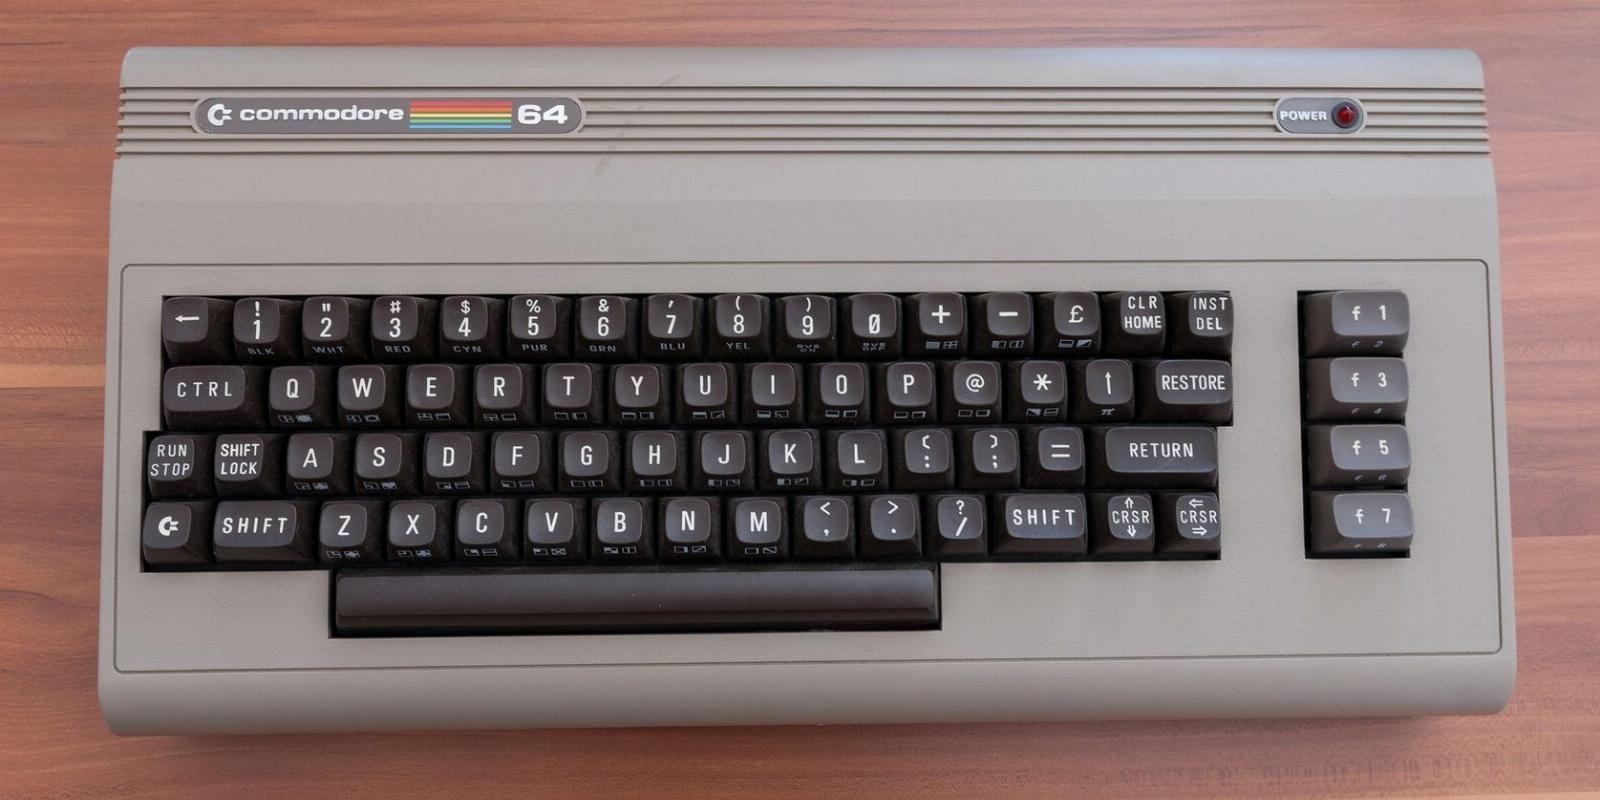 When Did the Commodore 64 Come Out and Is It Worth Anything Today?